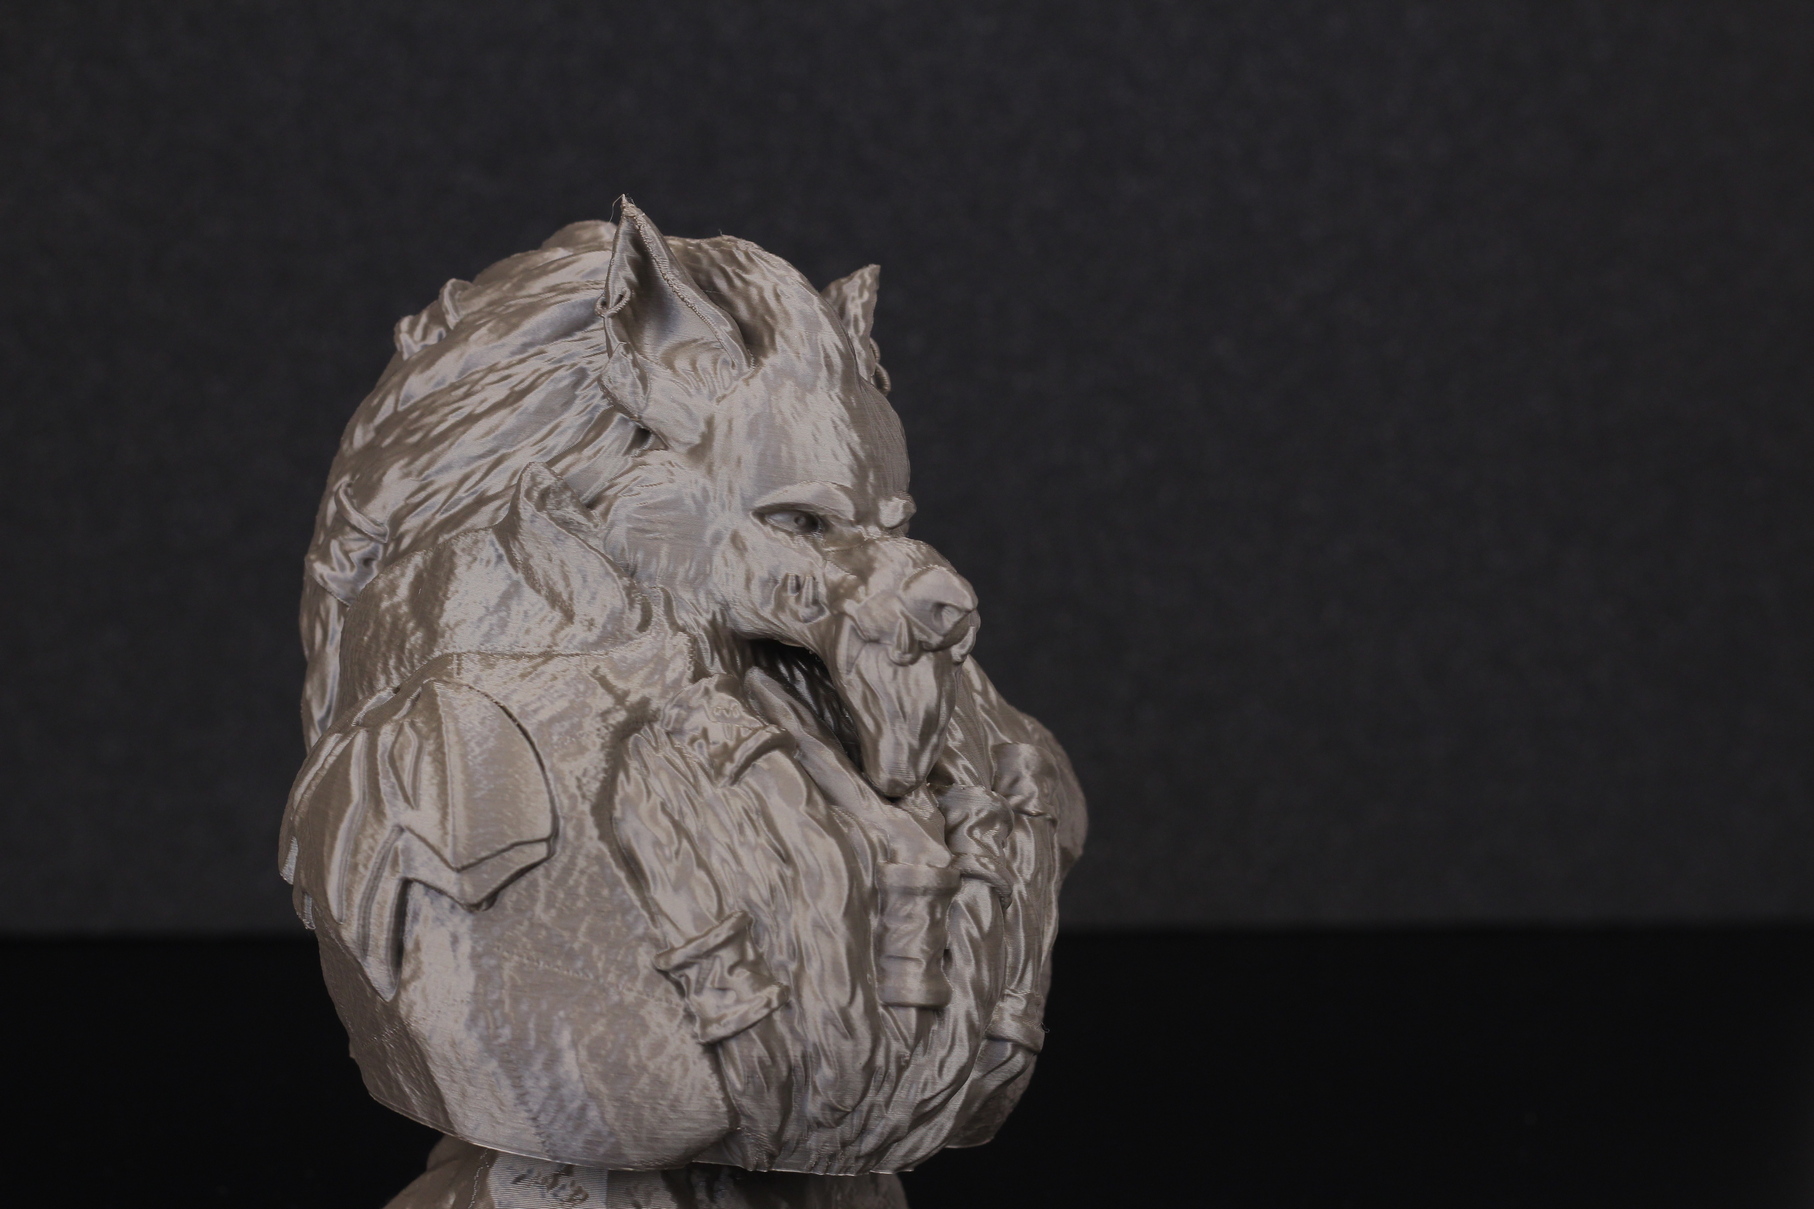 Worgen Bust printed on RatRig V Core 3 1 | RatRig V-Core 3 Review: Premium CoreXY 3D Printer Kit